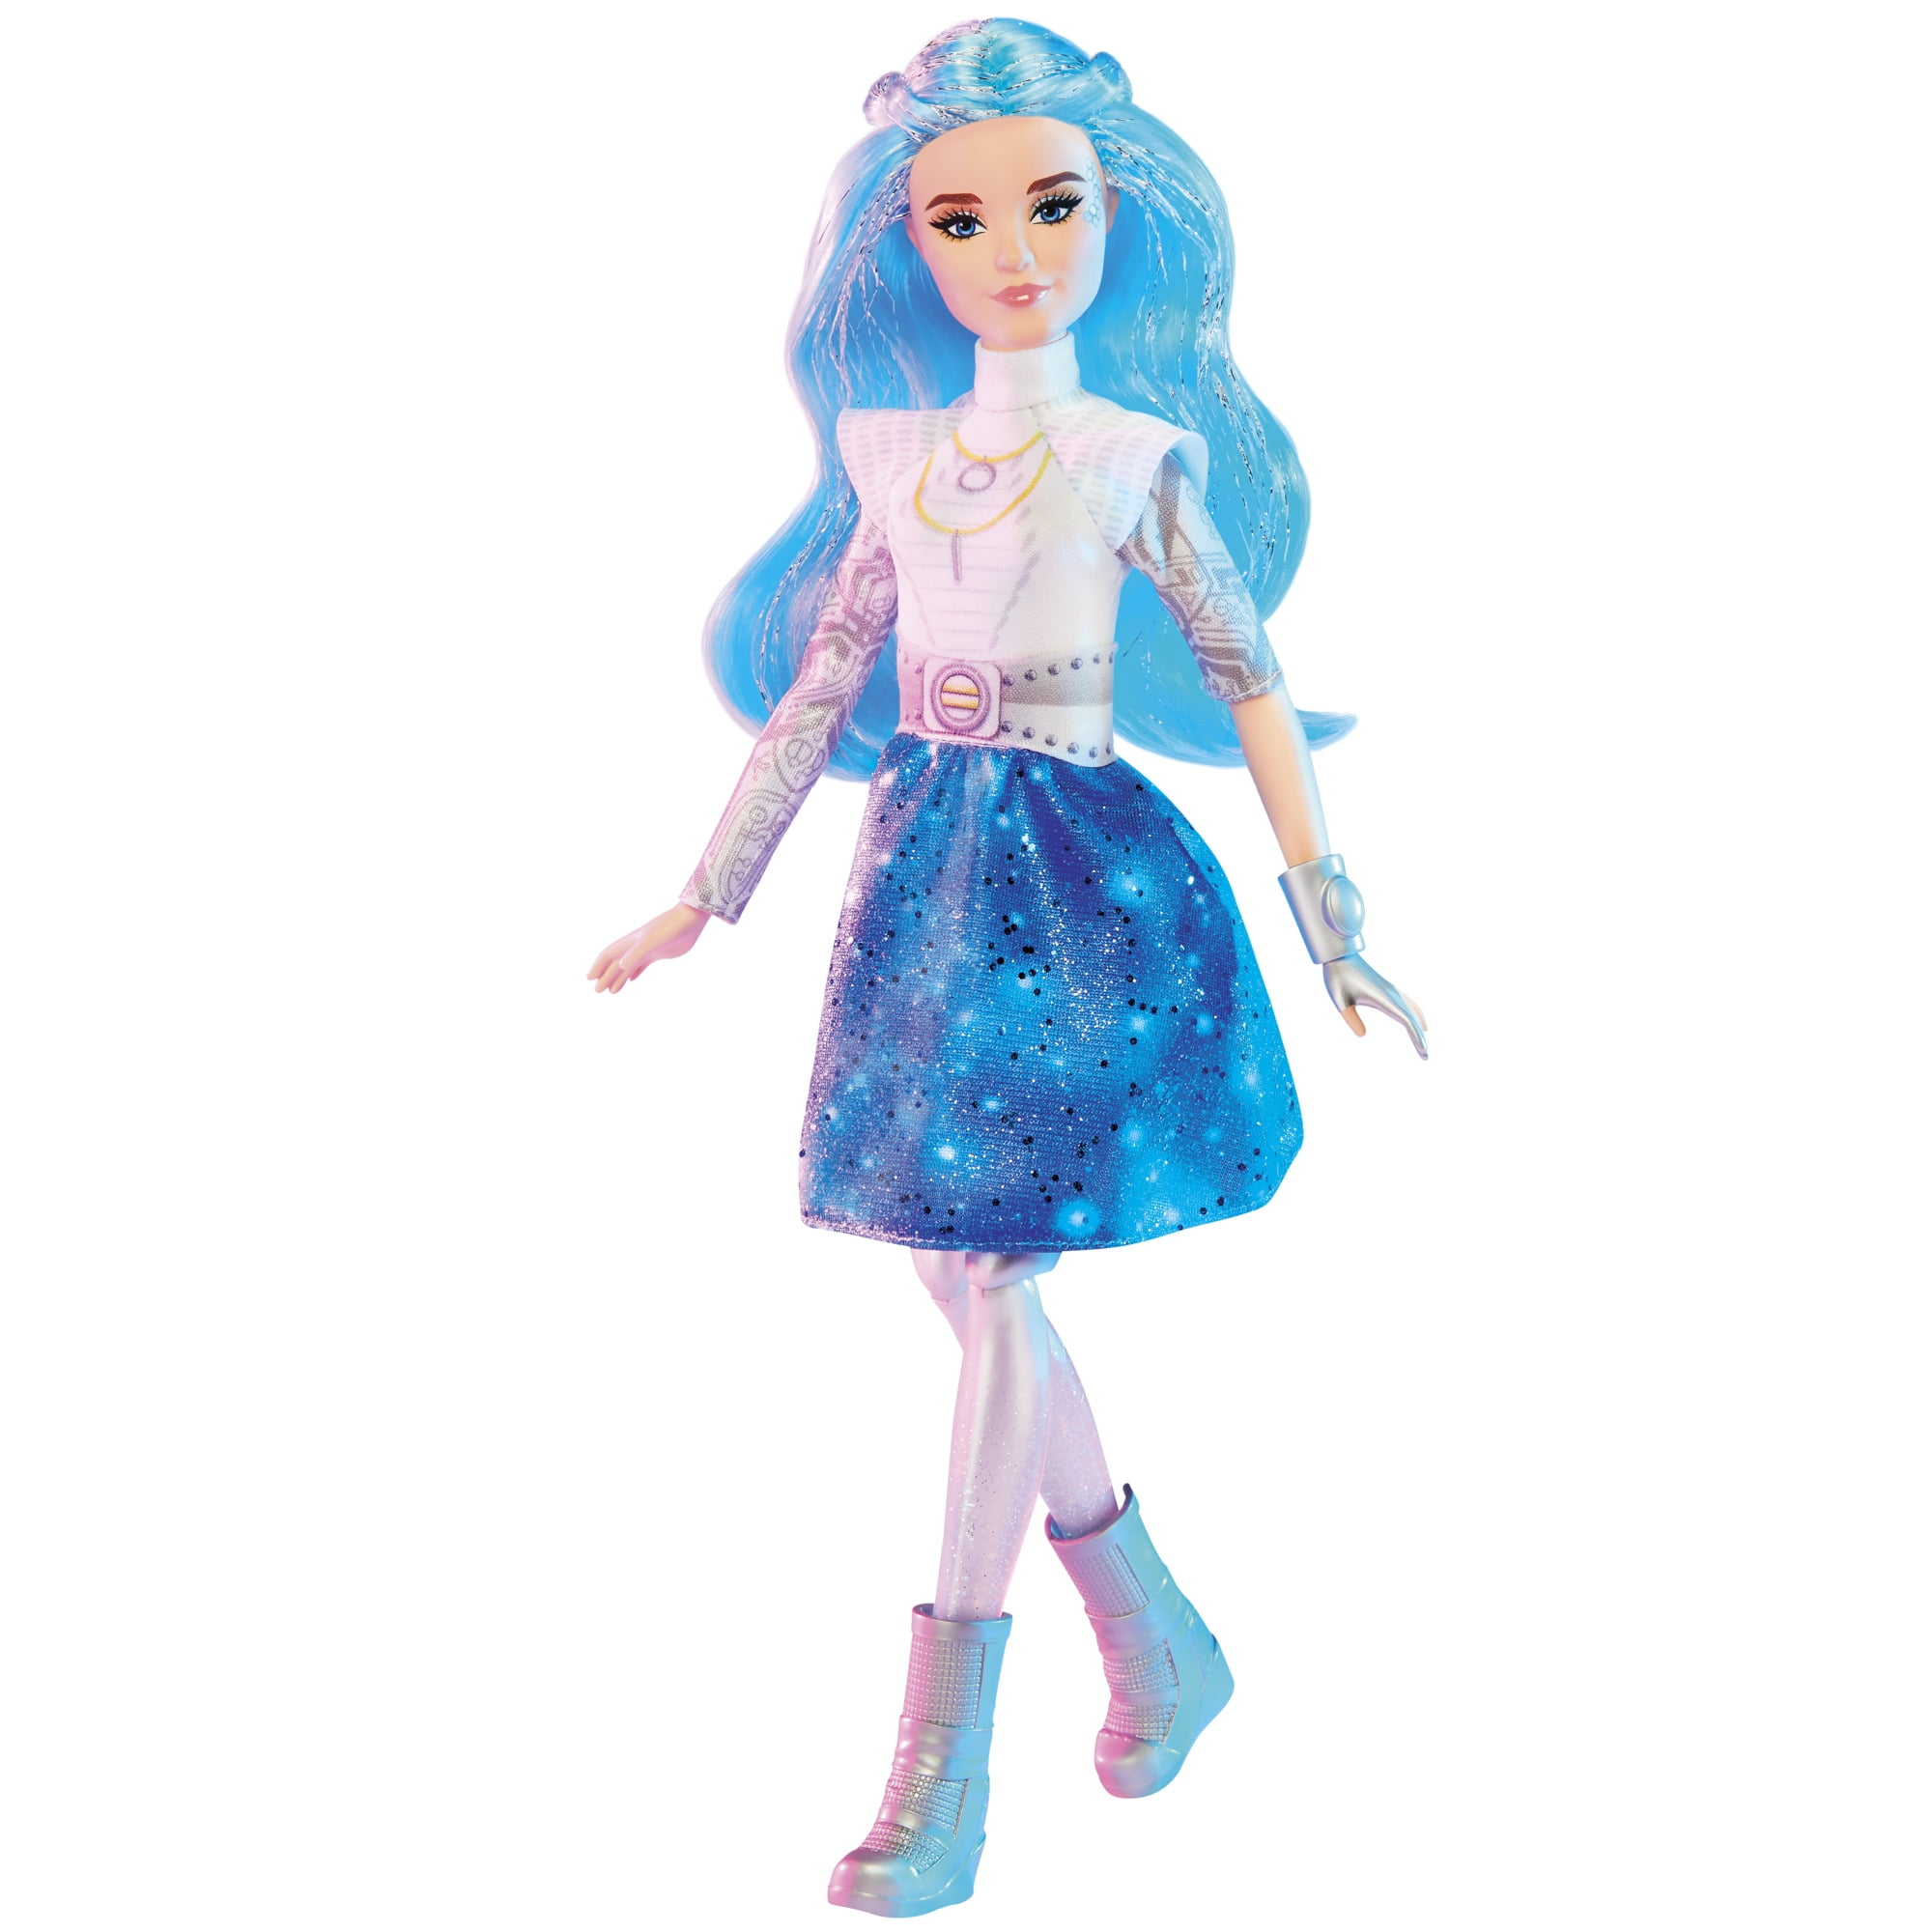  Disney Princess Zombies 3 A-spen Fashion Doll - 12-Inch Doll  with Blue Hair, Alien Outfit, Shoes, and Accessories. Toy for Kids Ages 6  and Up : Toys & Games